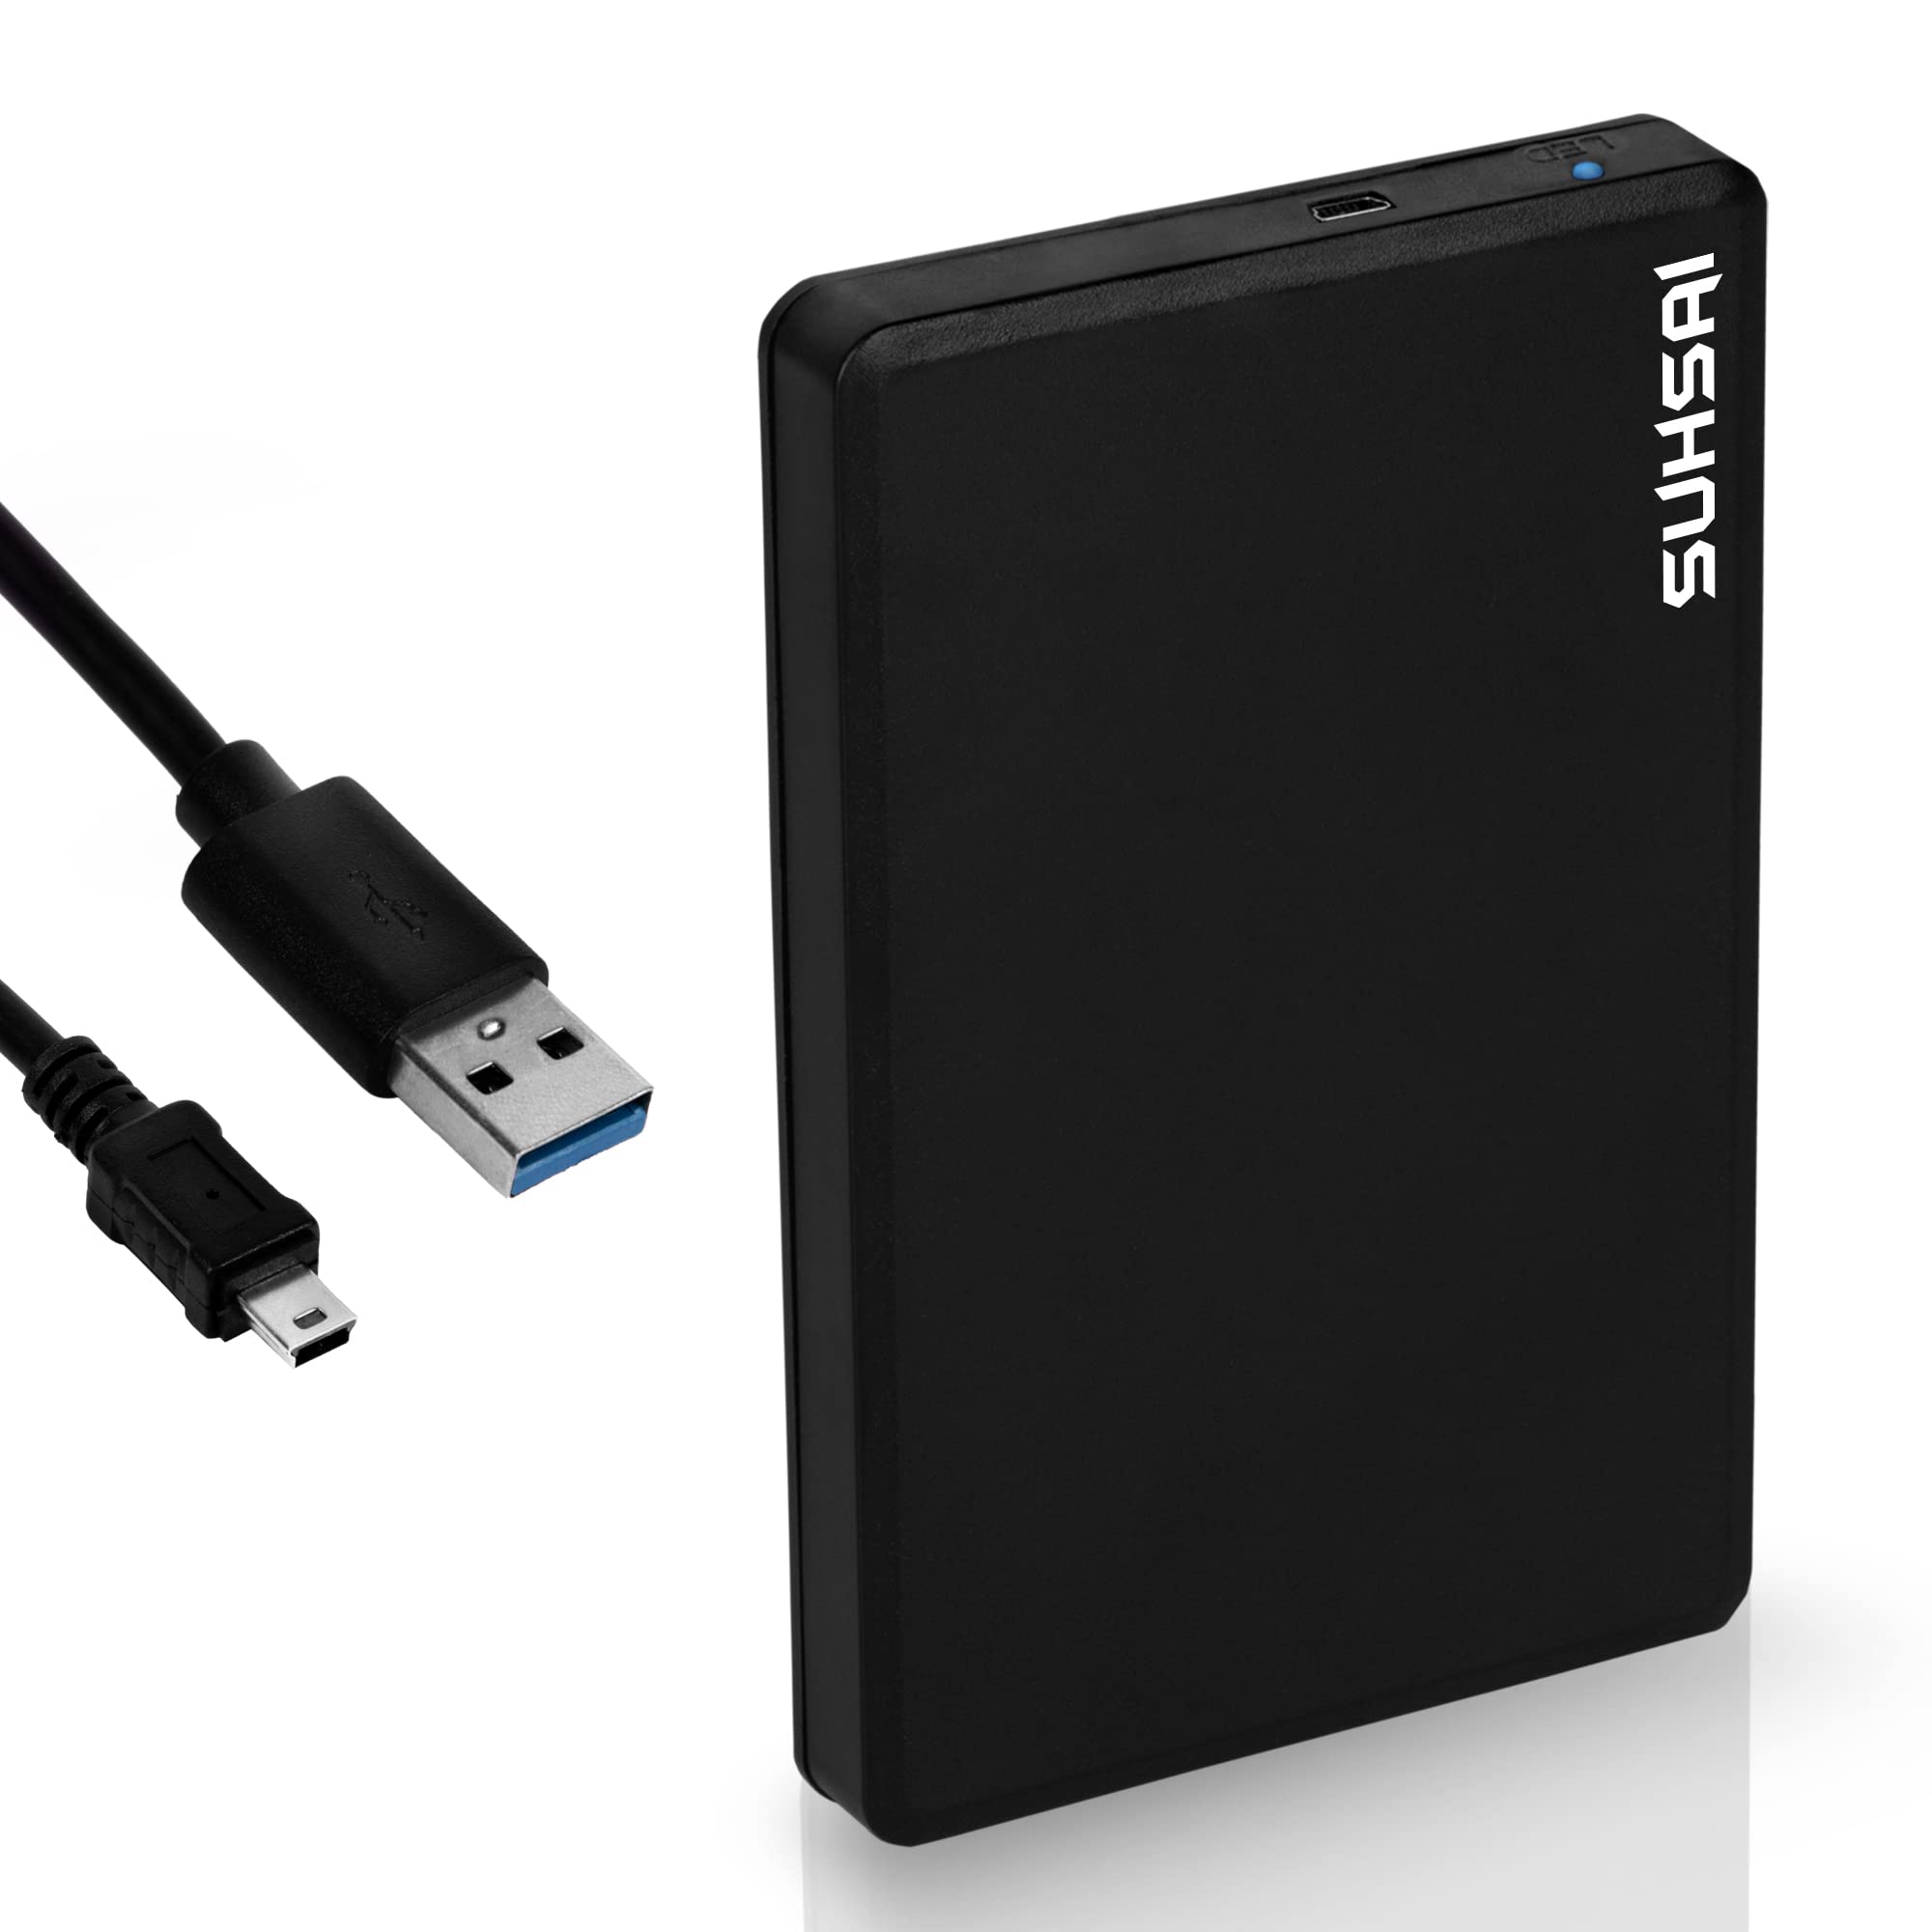 Purchase an external hard drive or USB drive with enough storage capacity for your backup needs
Connect the external hard drive or USB drive to your computer and format it if necessary